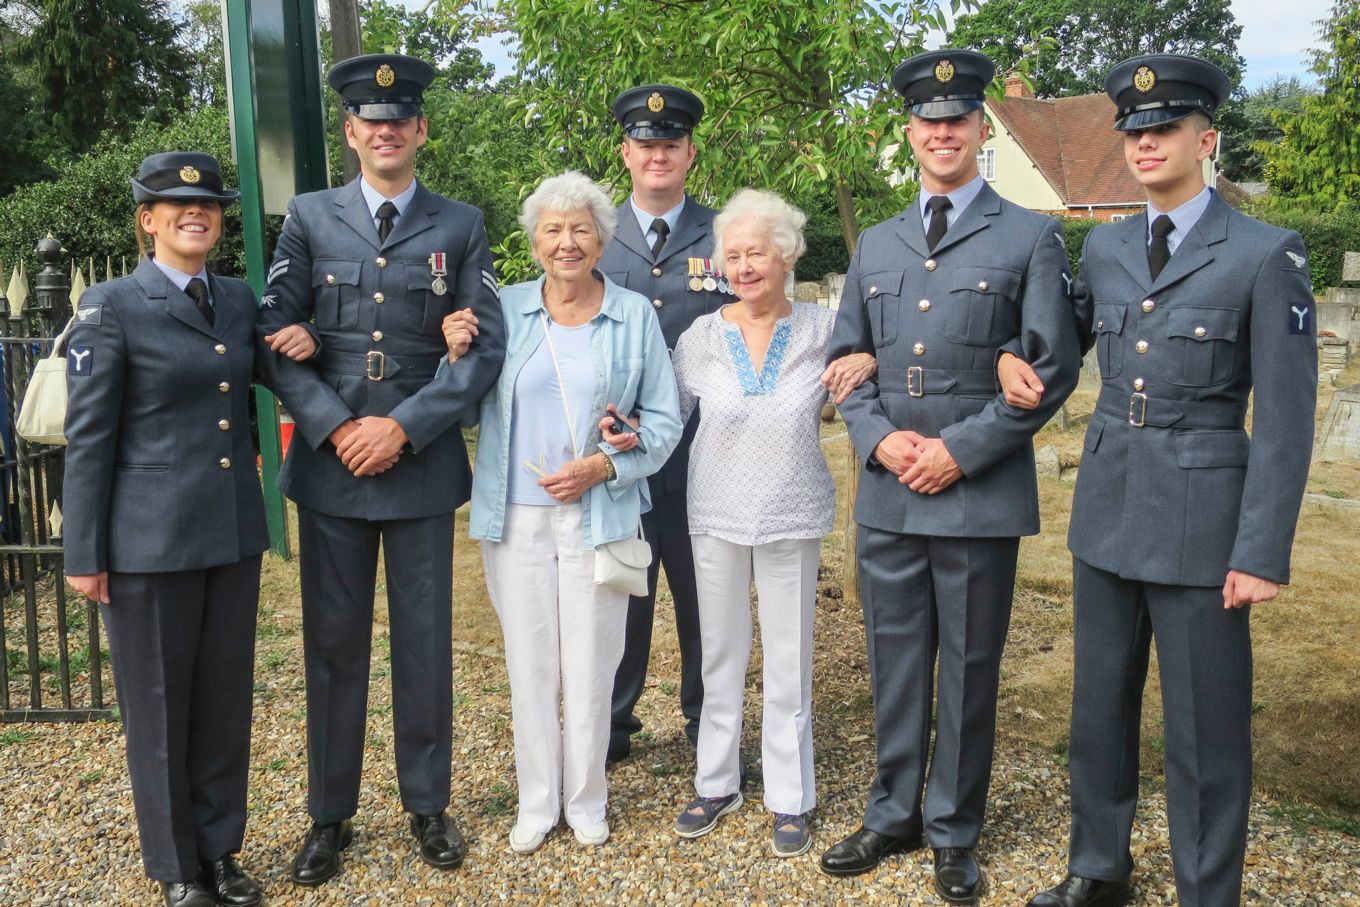 8 Sqn personnel with local community